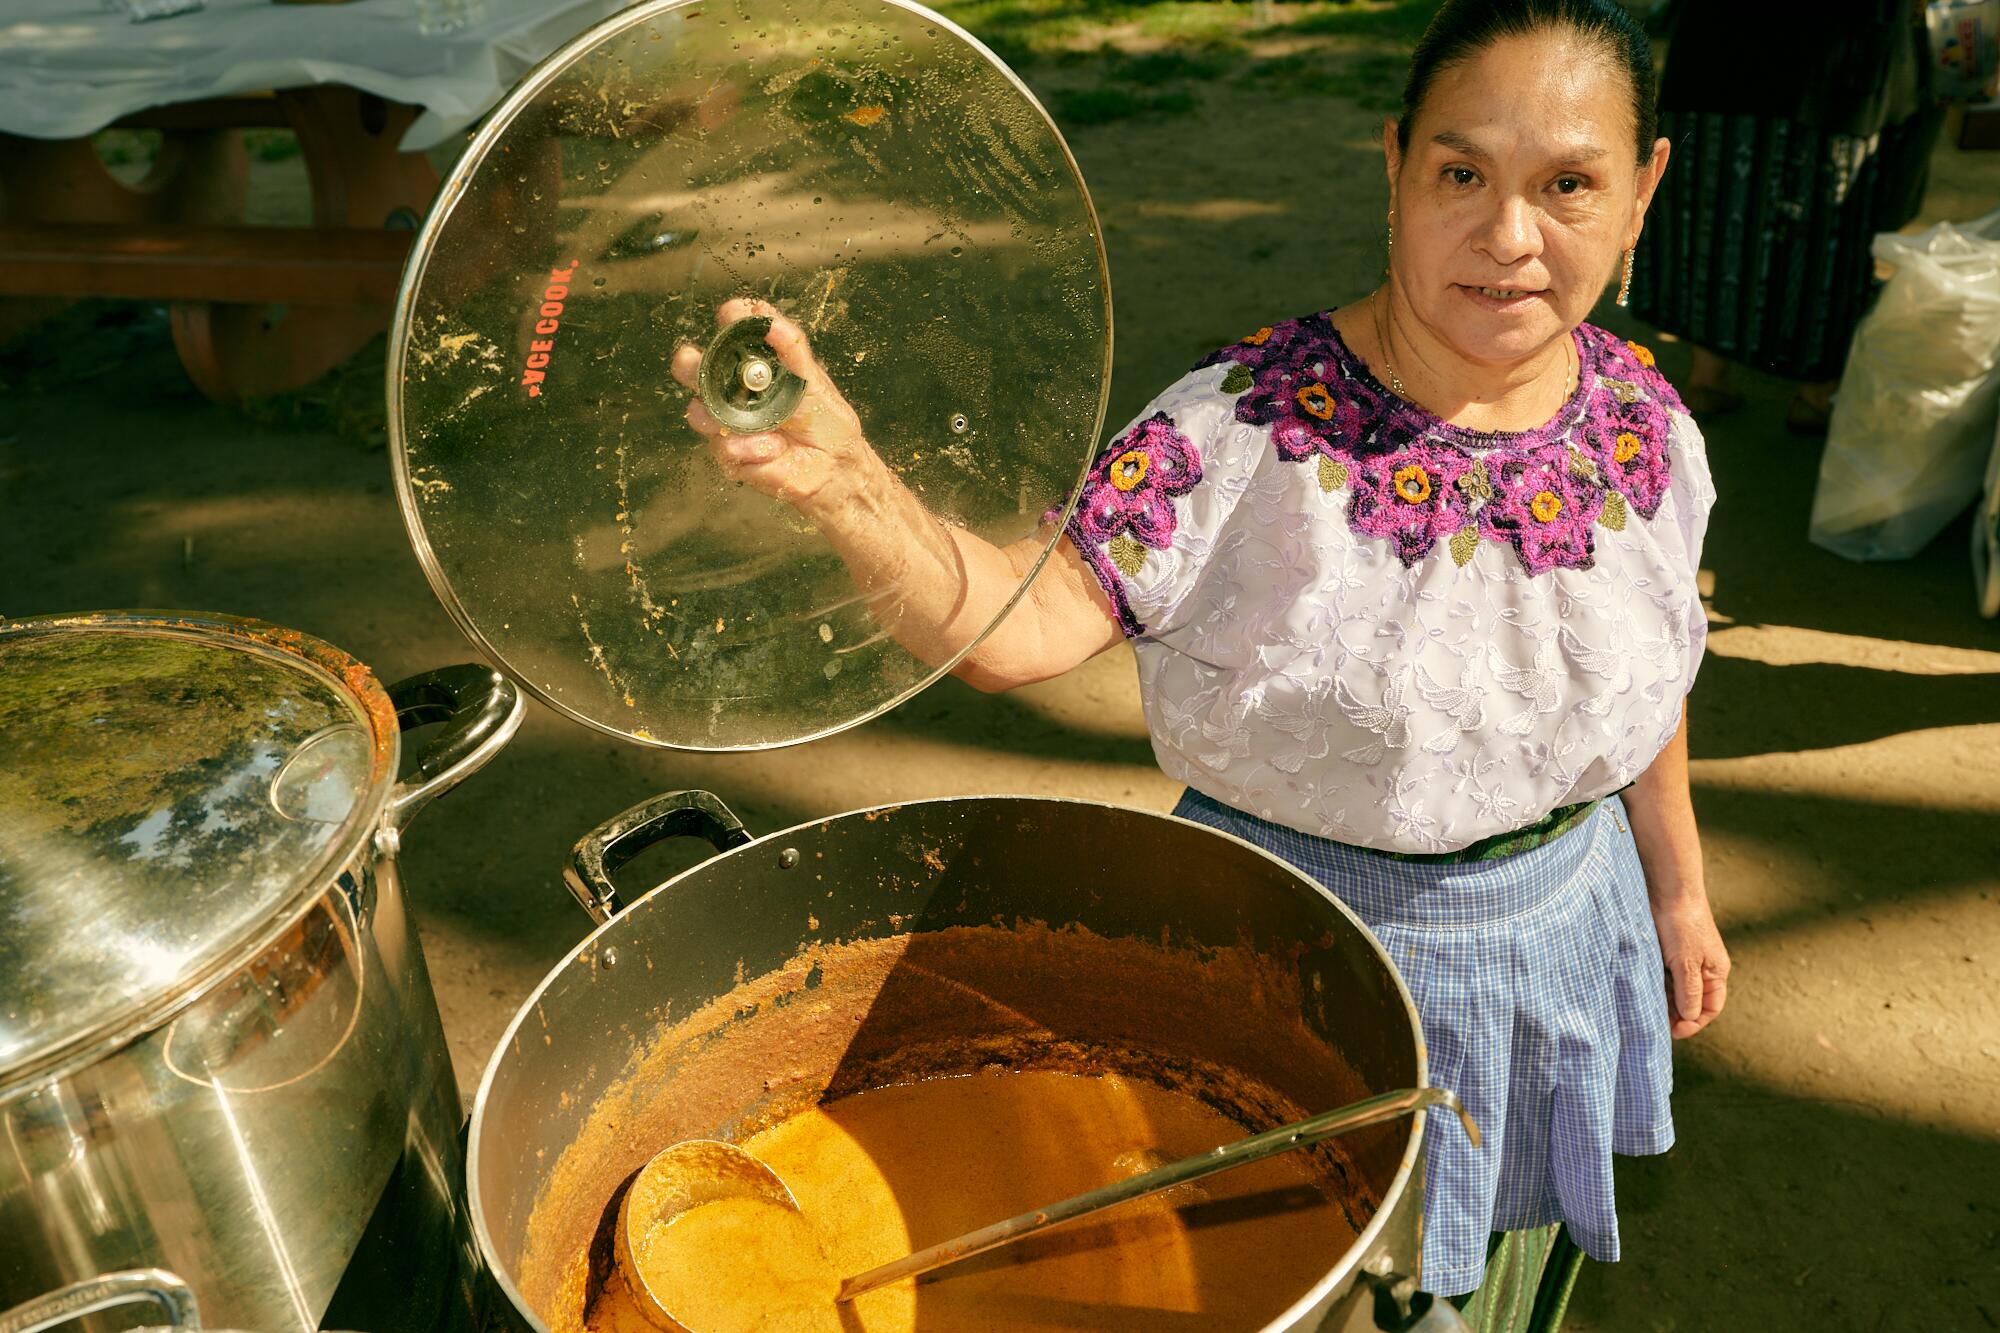 A woman lifts a glass lid to reveal a large pot of mole.